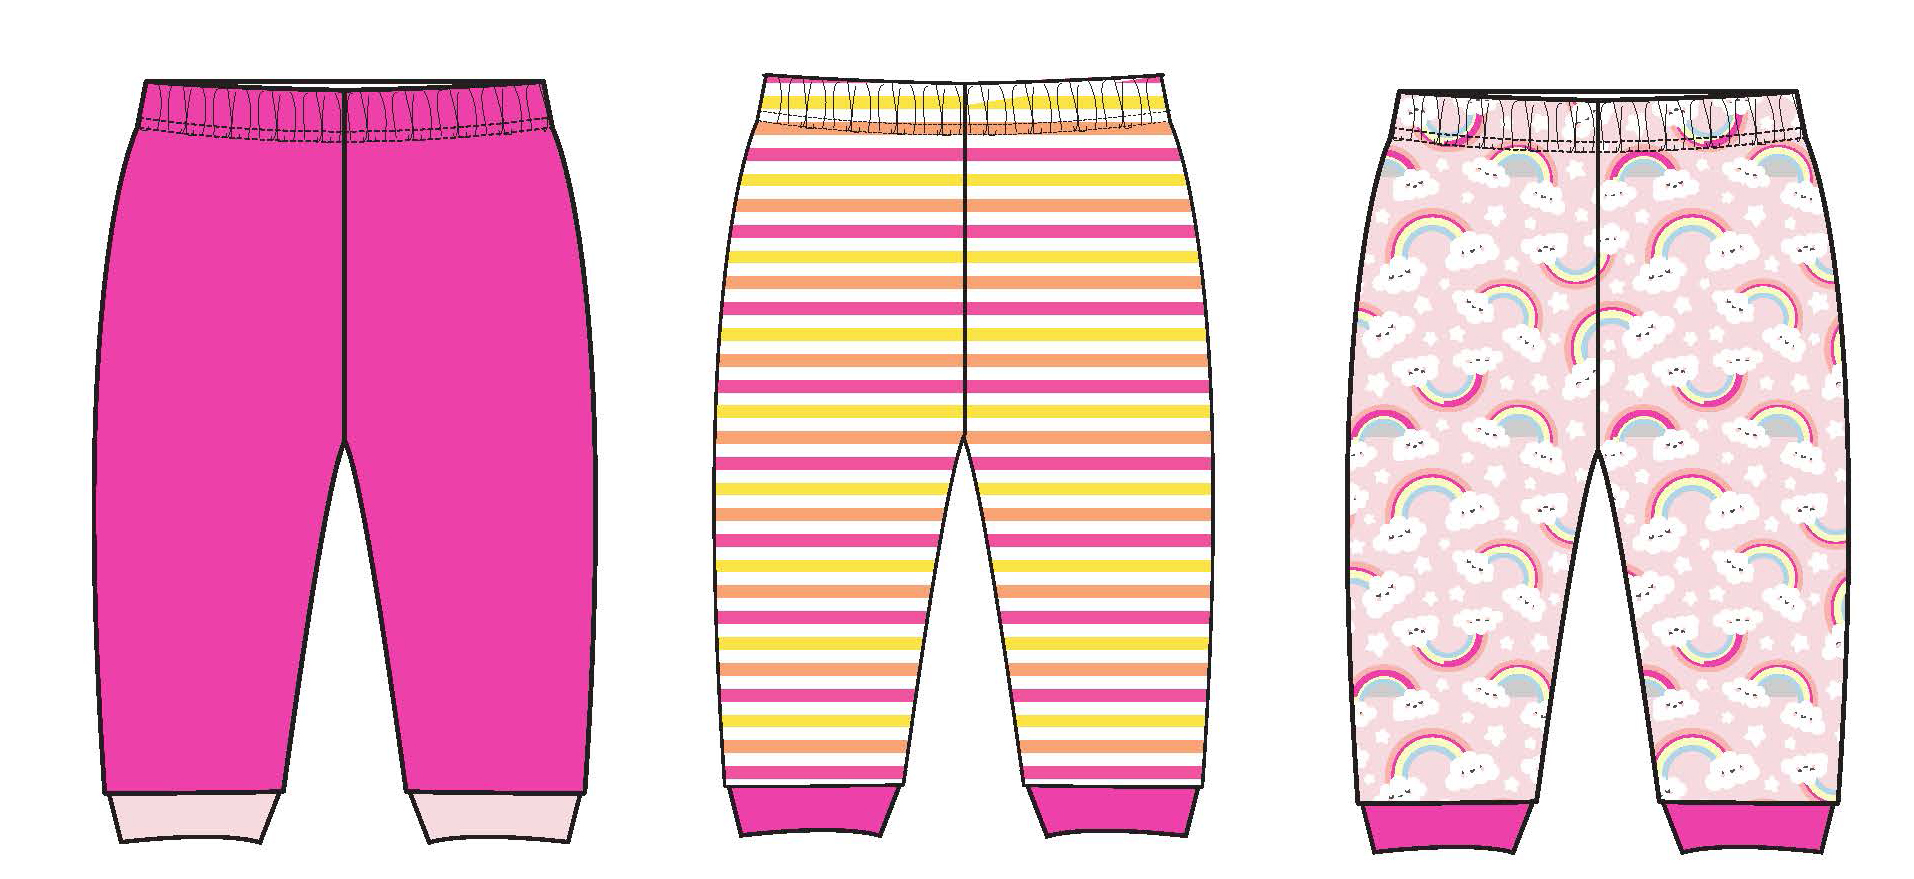 ''Baby Girl's Printed Pull-On PANTS w/ Solid, Rainbow, & Striped Print - 3-Pack''